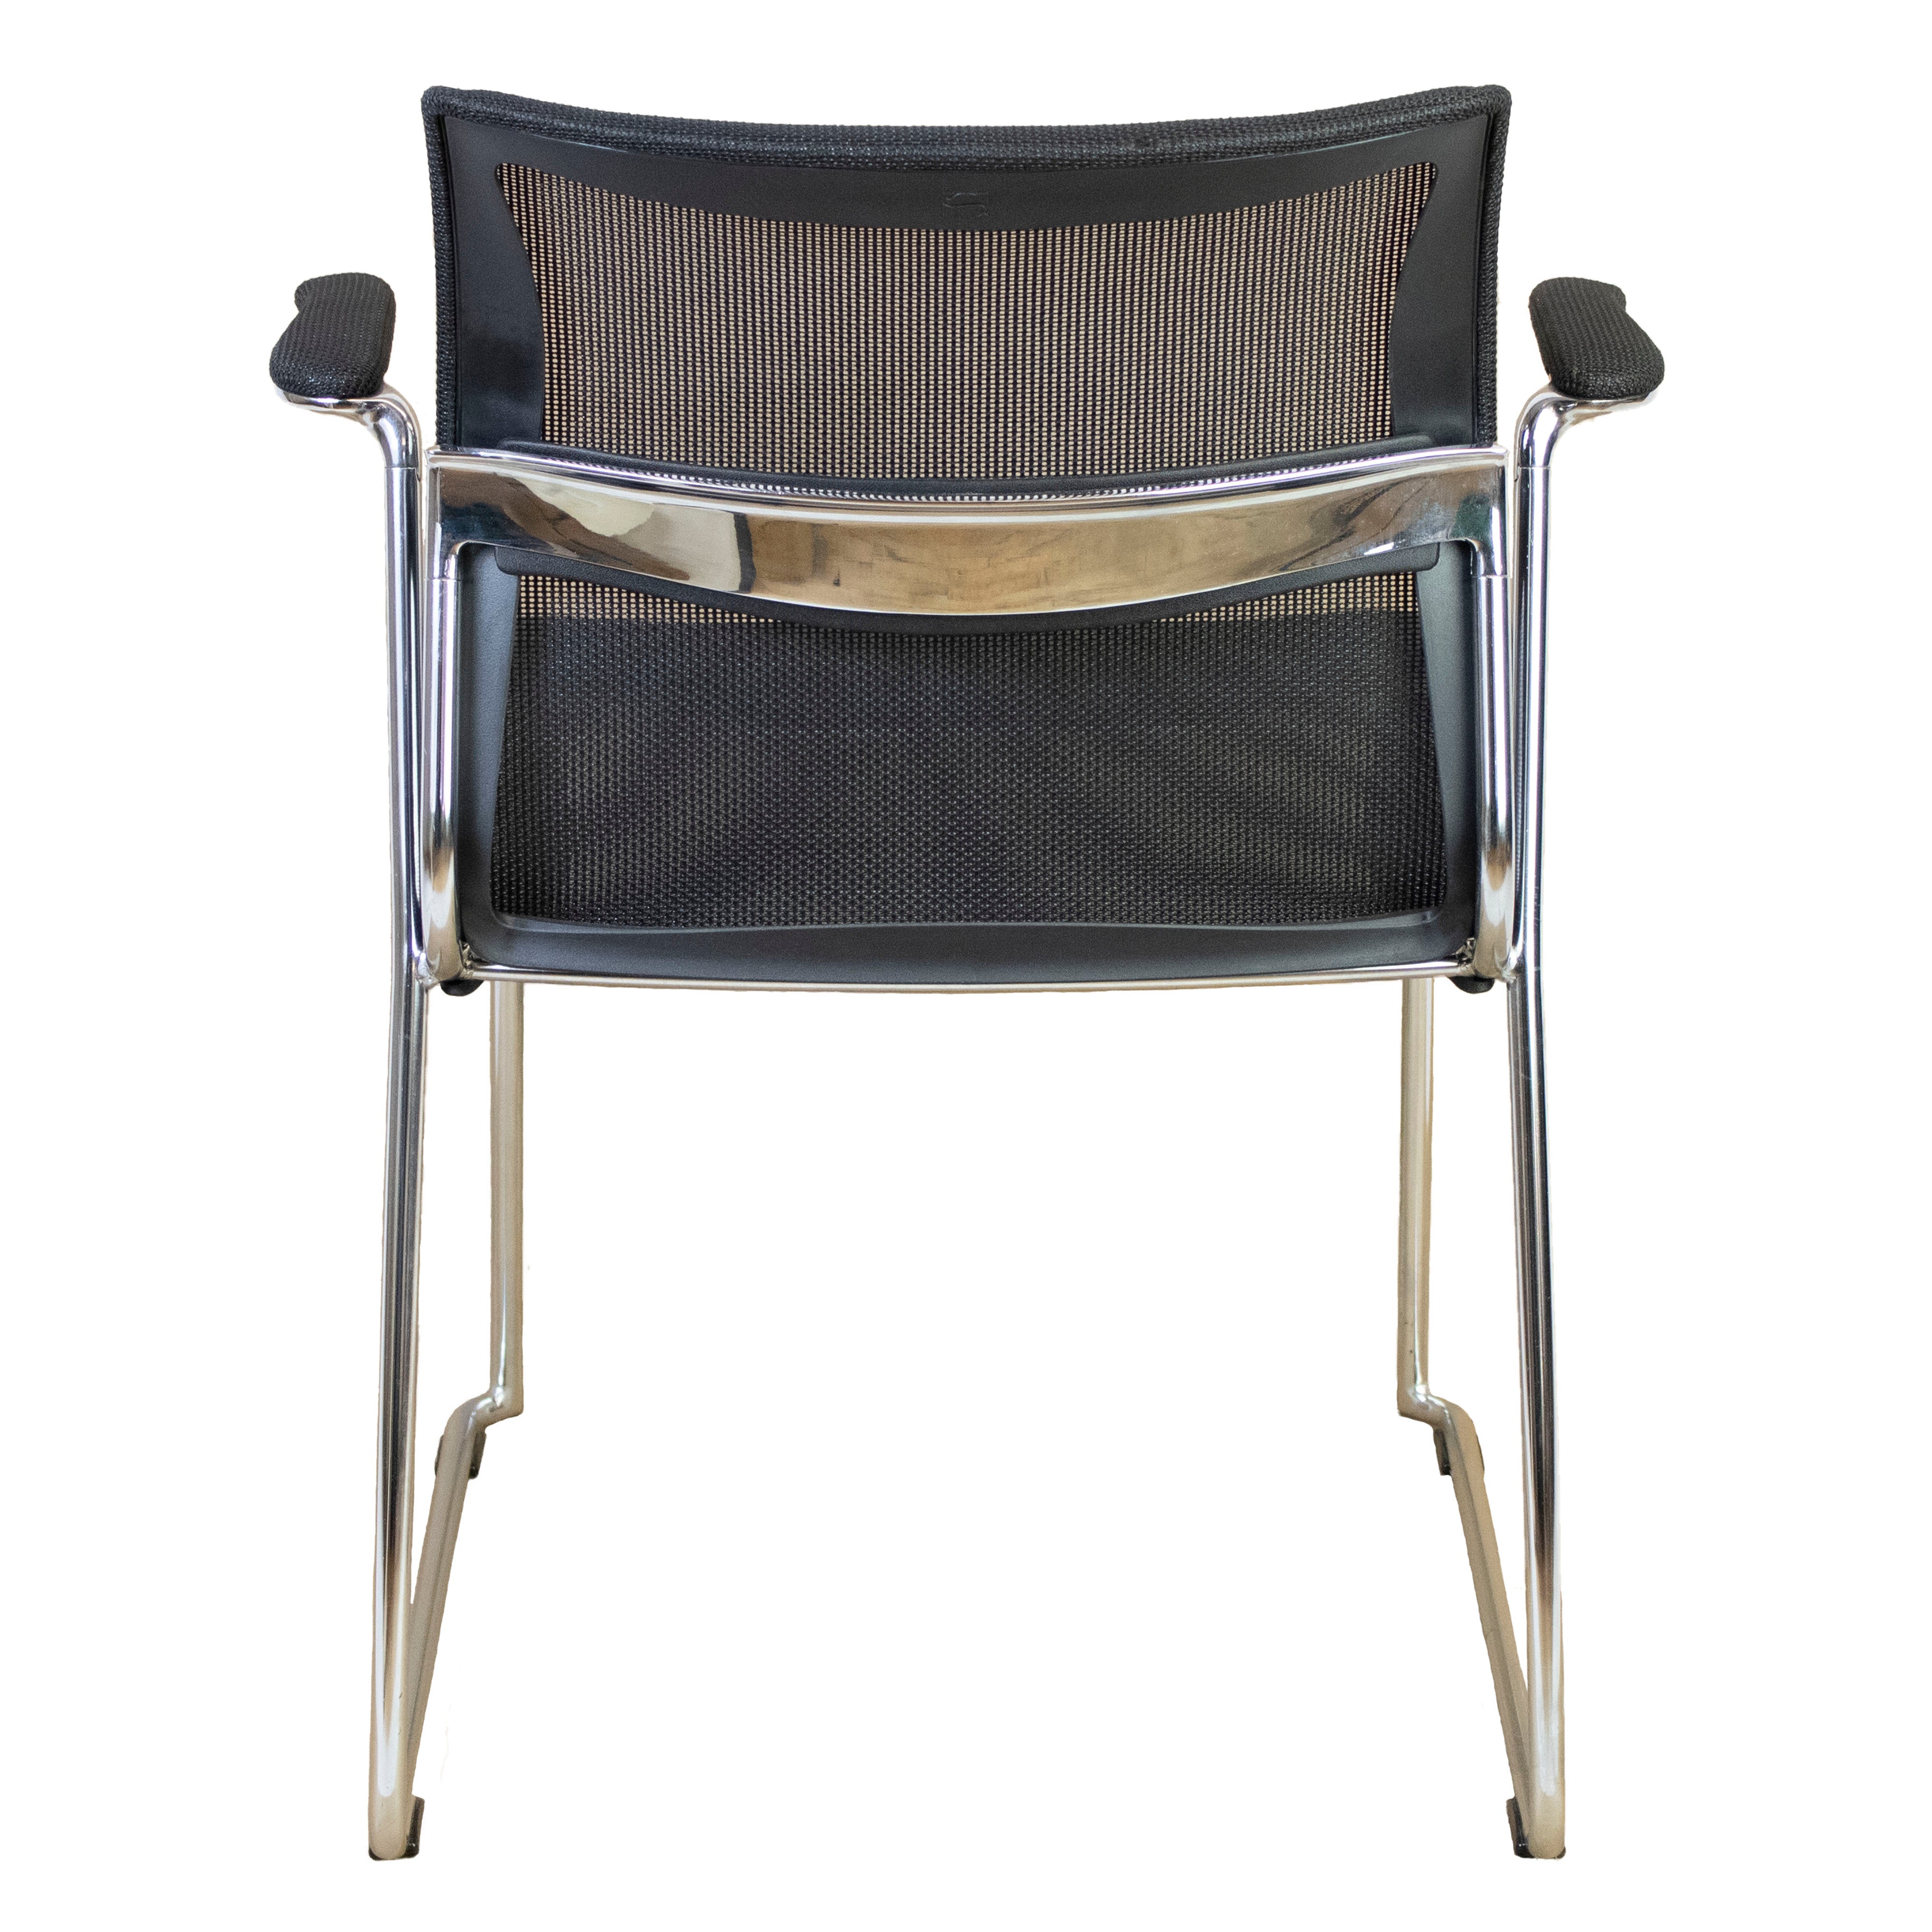 Stylex Zephyr Stack Chair - Preowned